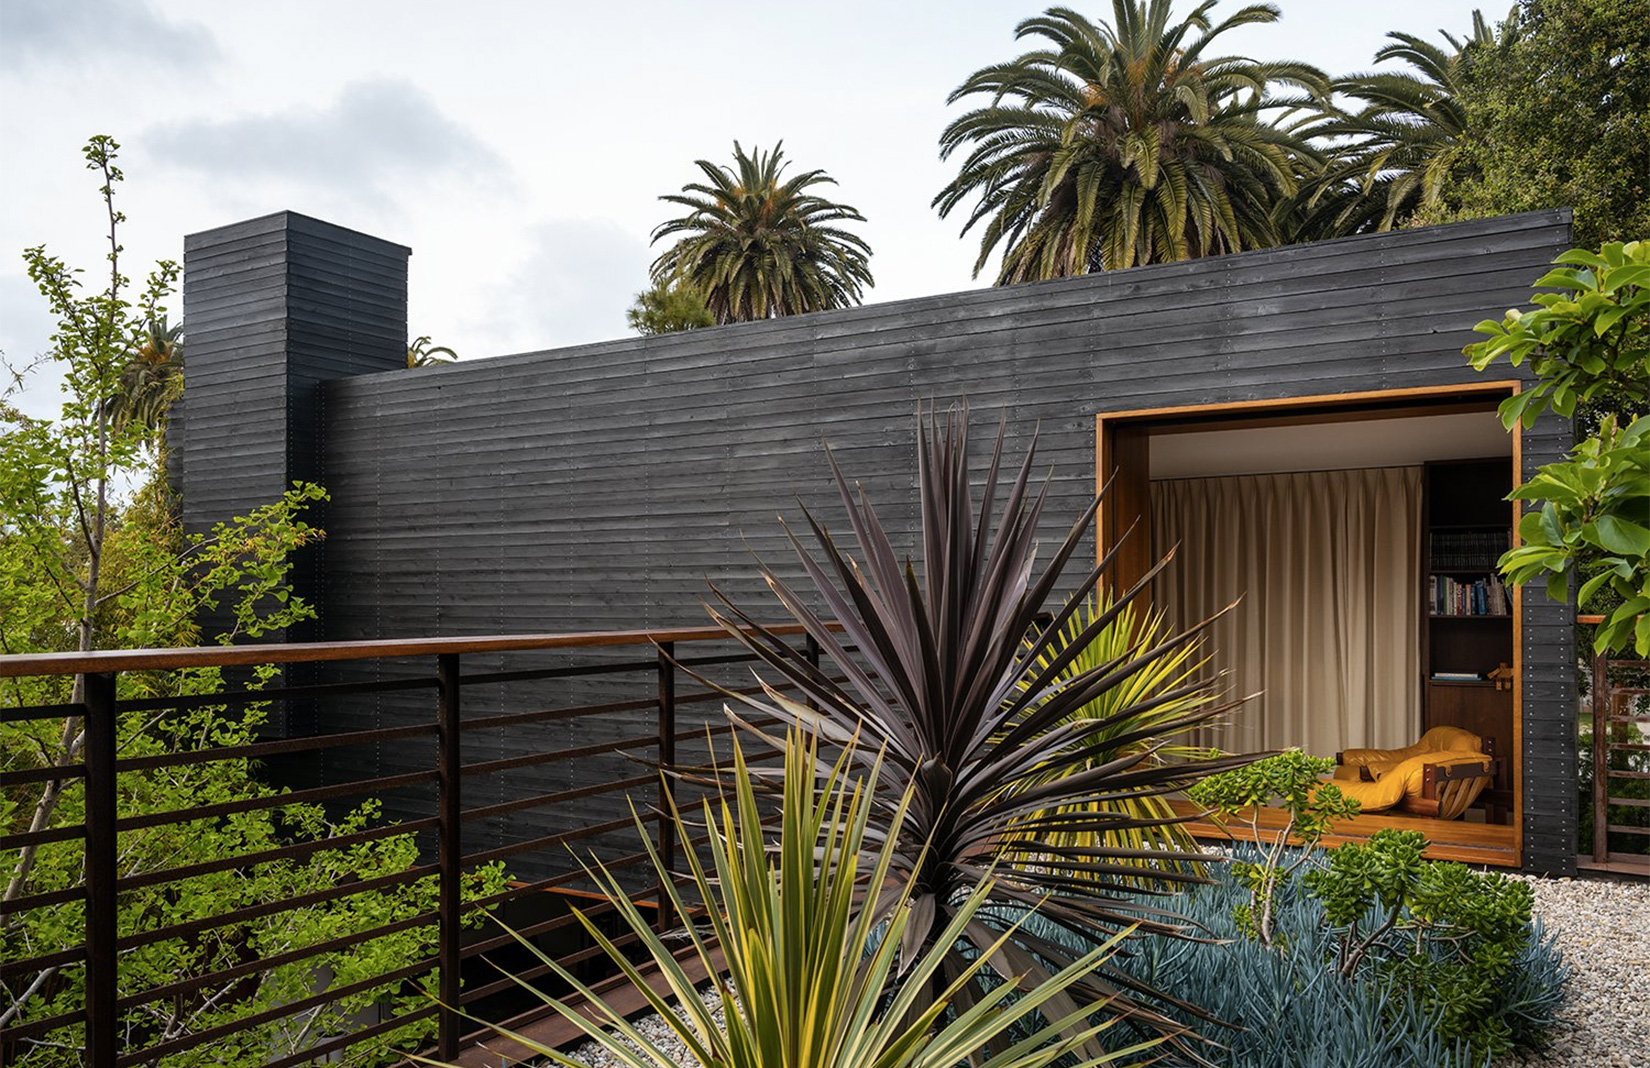 A cedar-clad home surrounded by gardens in Los Angeles, US